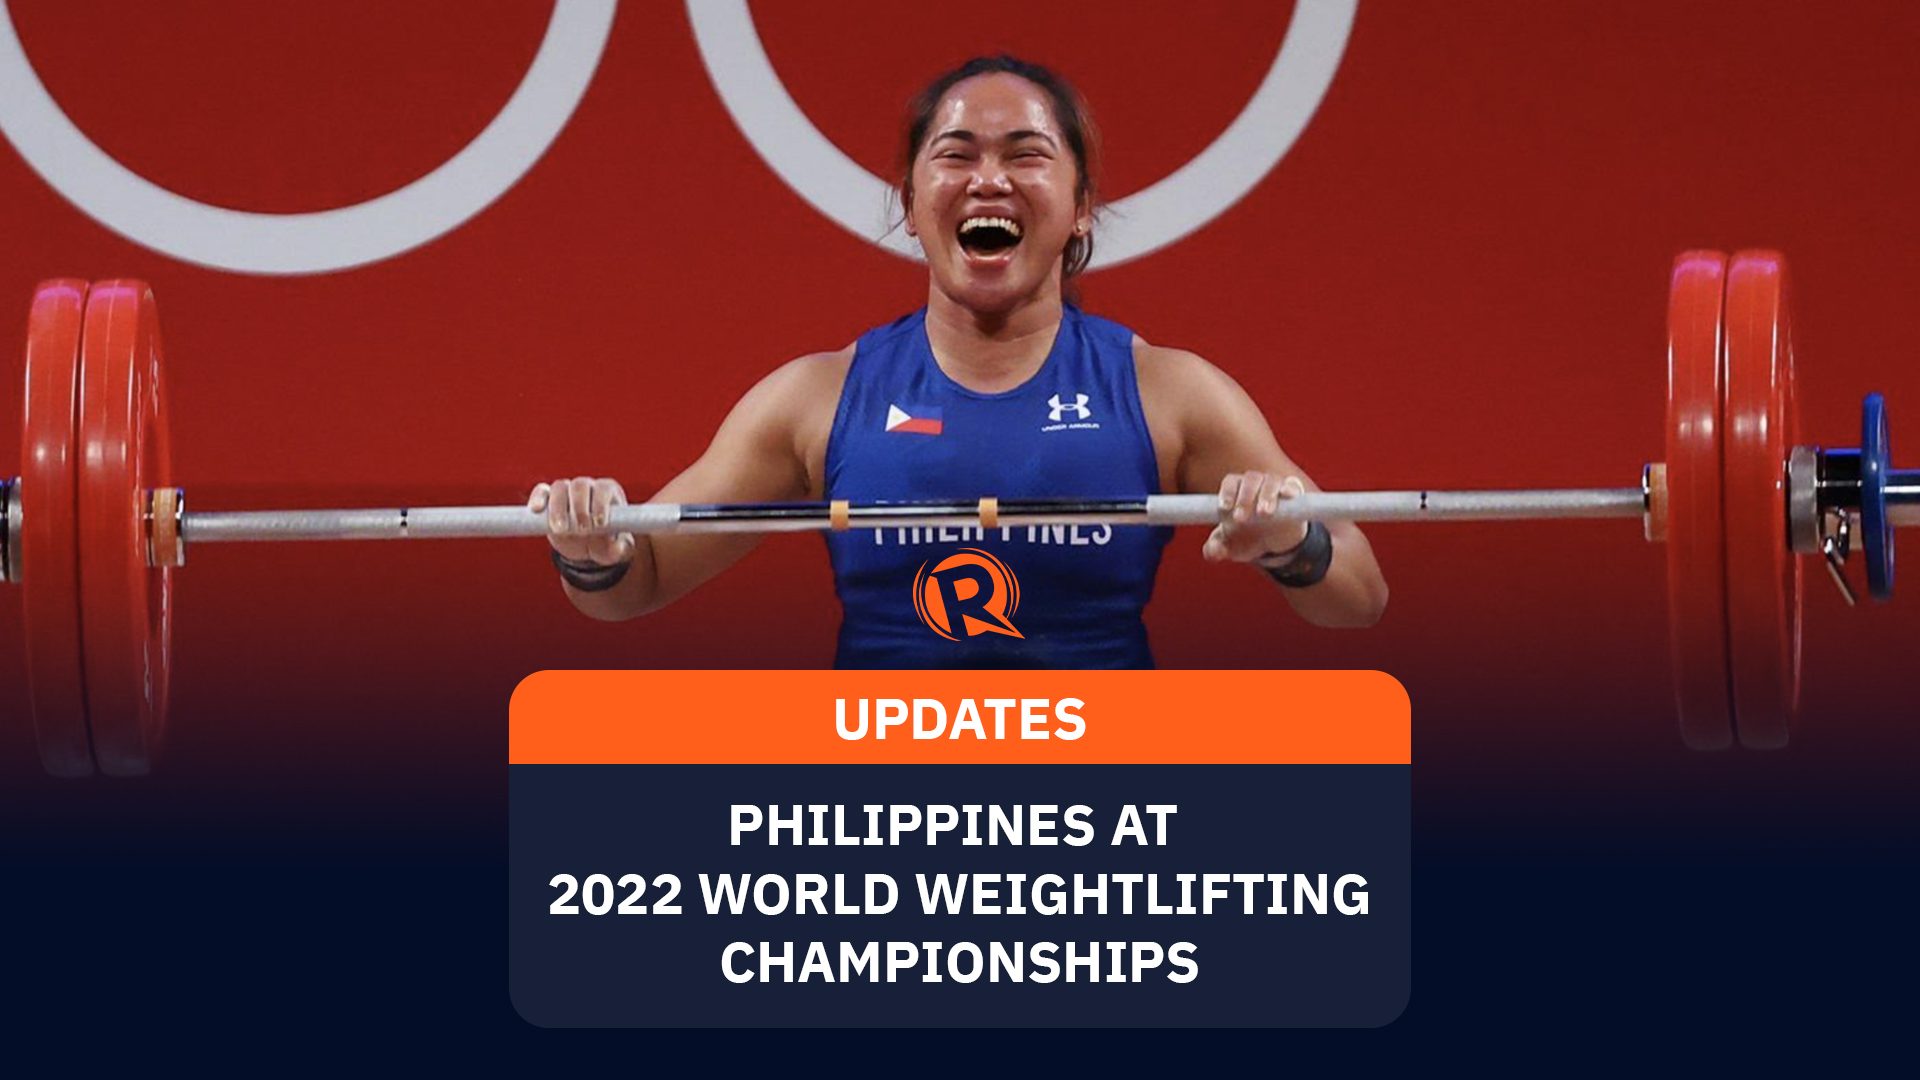 UPDATES Philippines at the 2022 World Weightlifting Championships